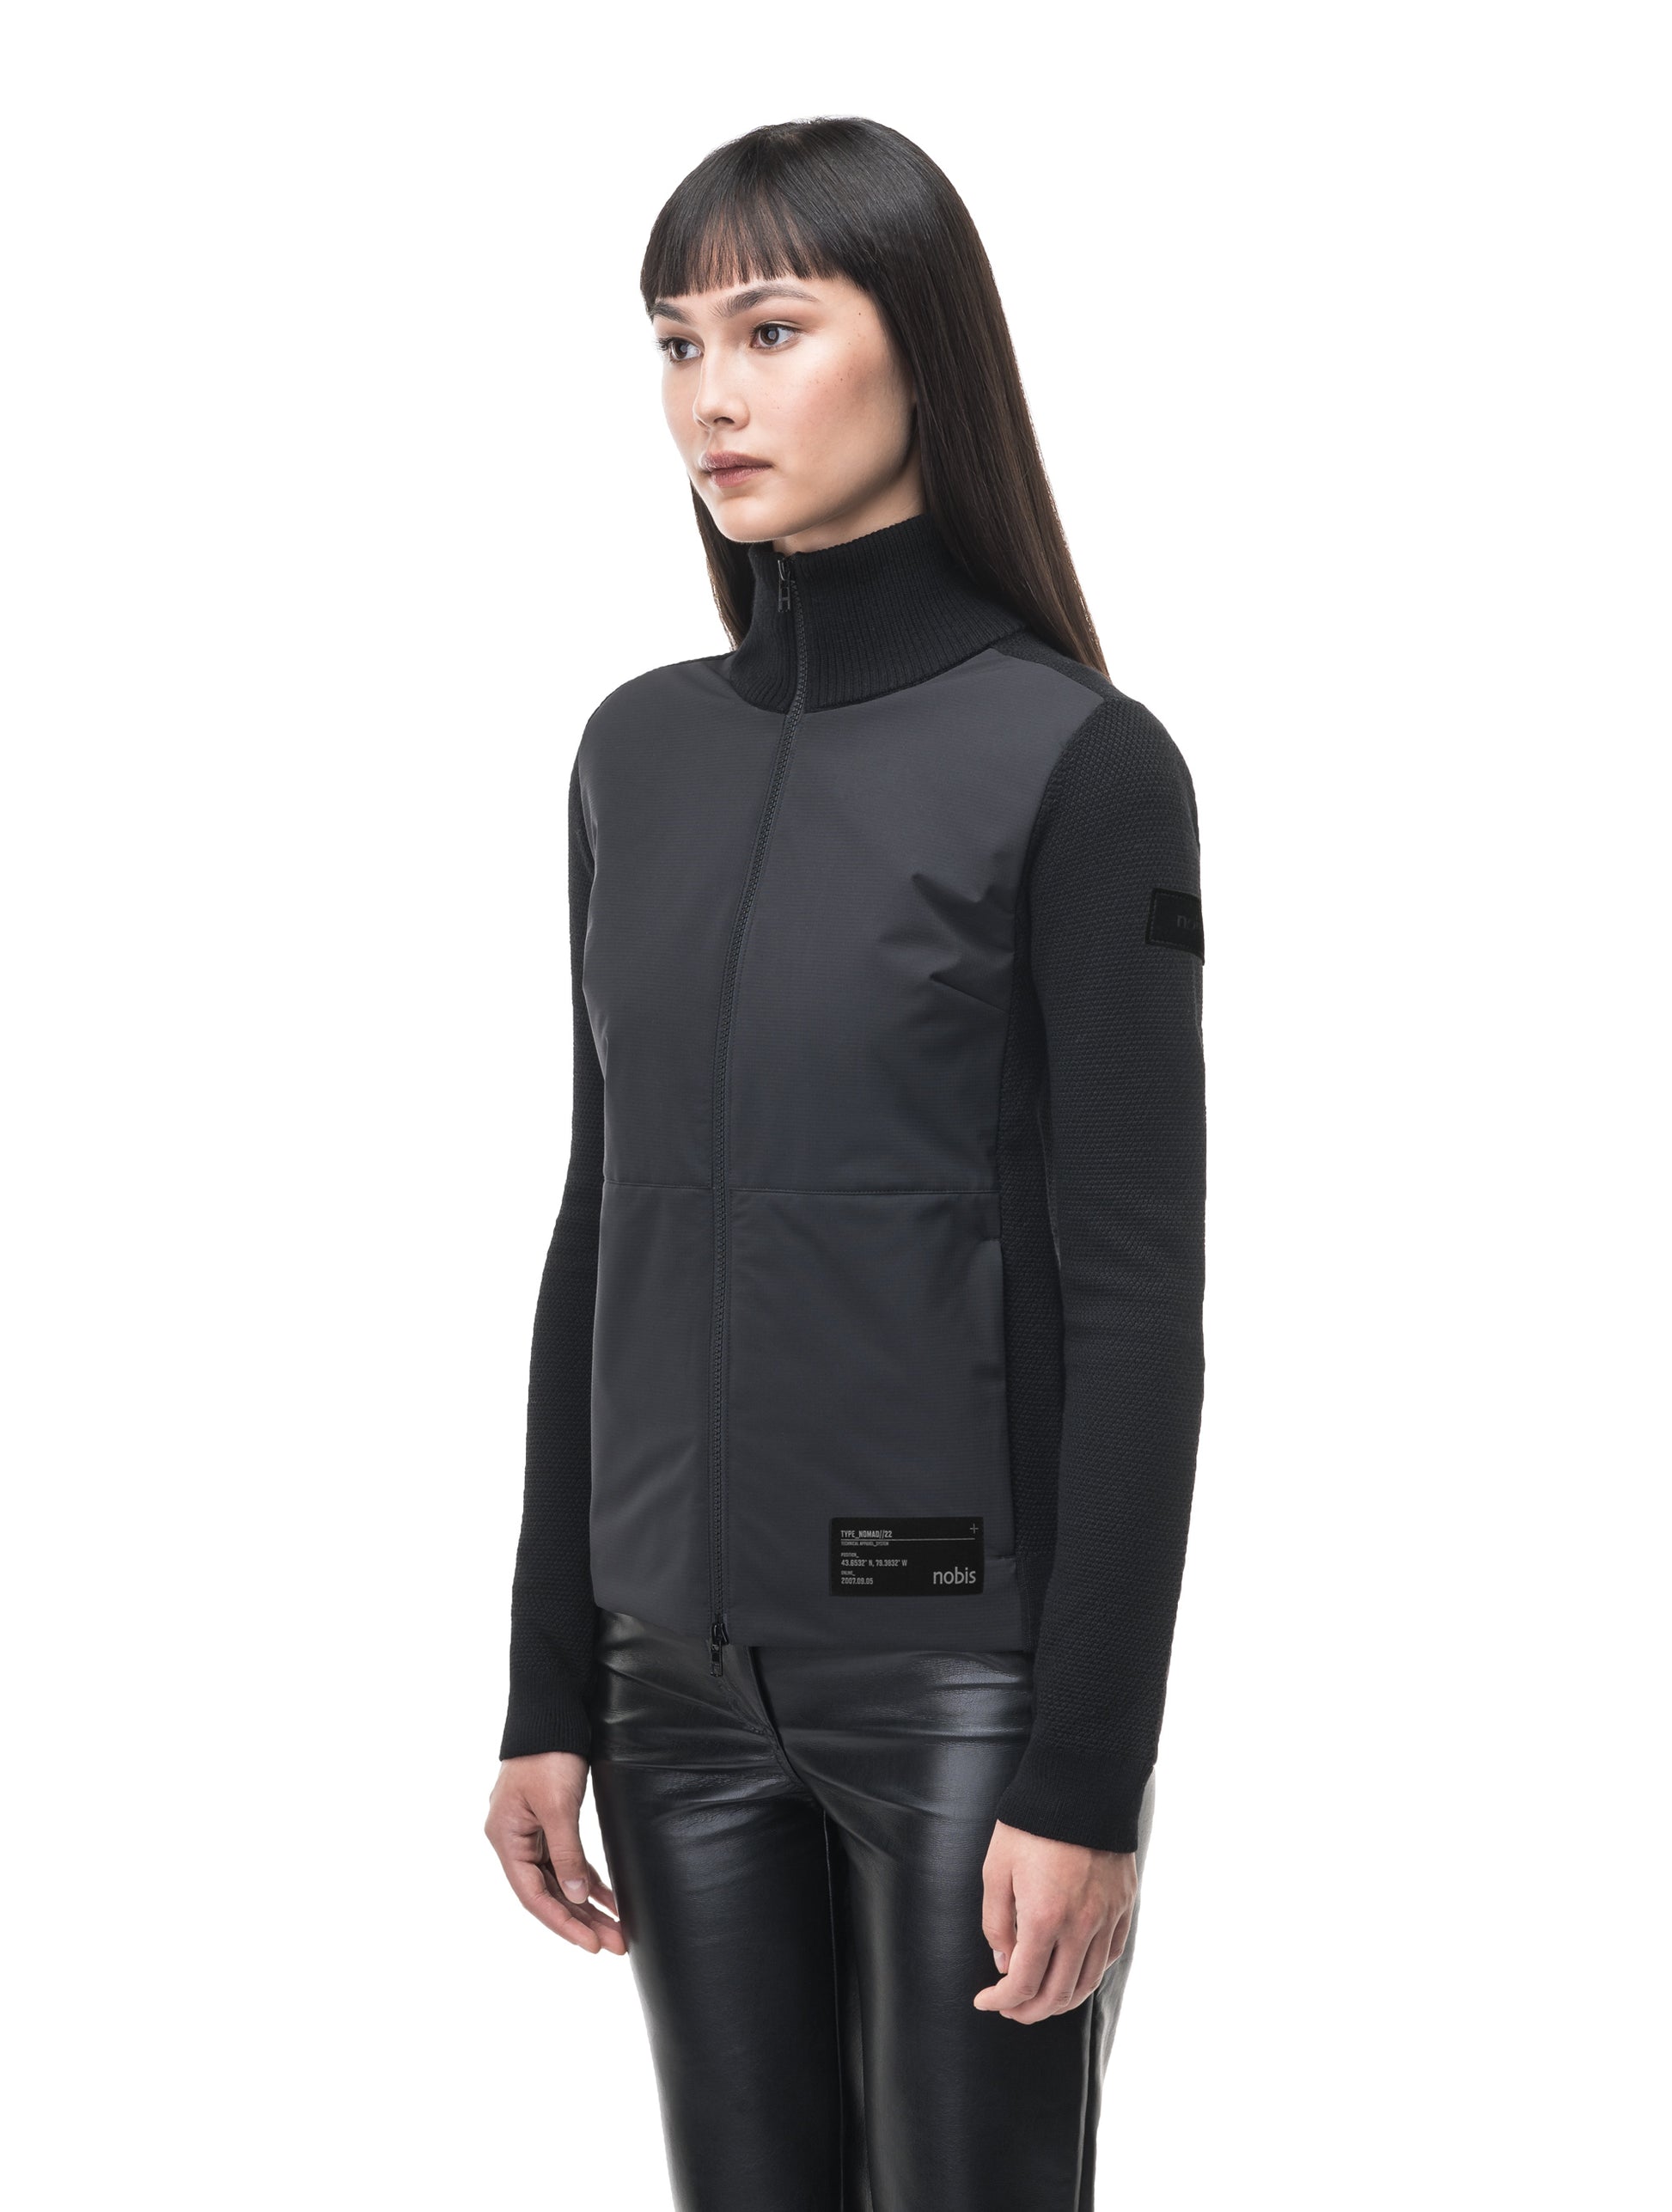 Evo Ladies Performance Full Zip Sweater in hip length, Primaloft Gold Insulation Active+, Merion wool knit collar, sleeves, back, and cuffs, two-way front zipper, and hidden waist pockets, in Black